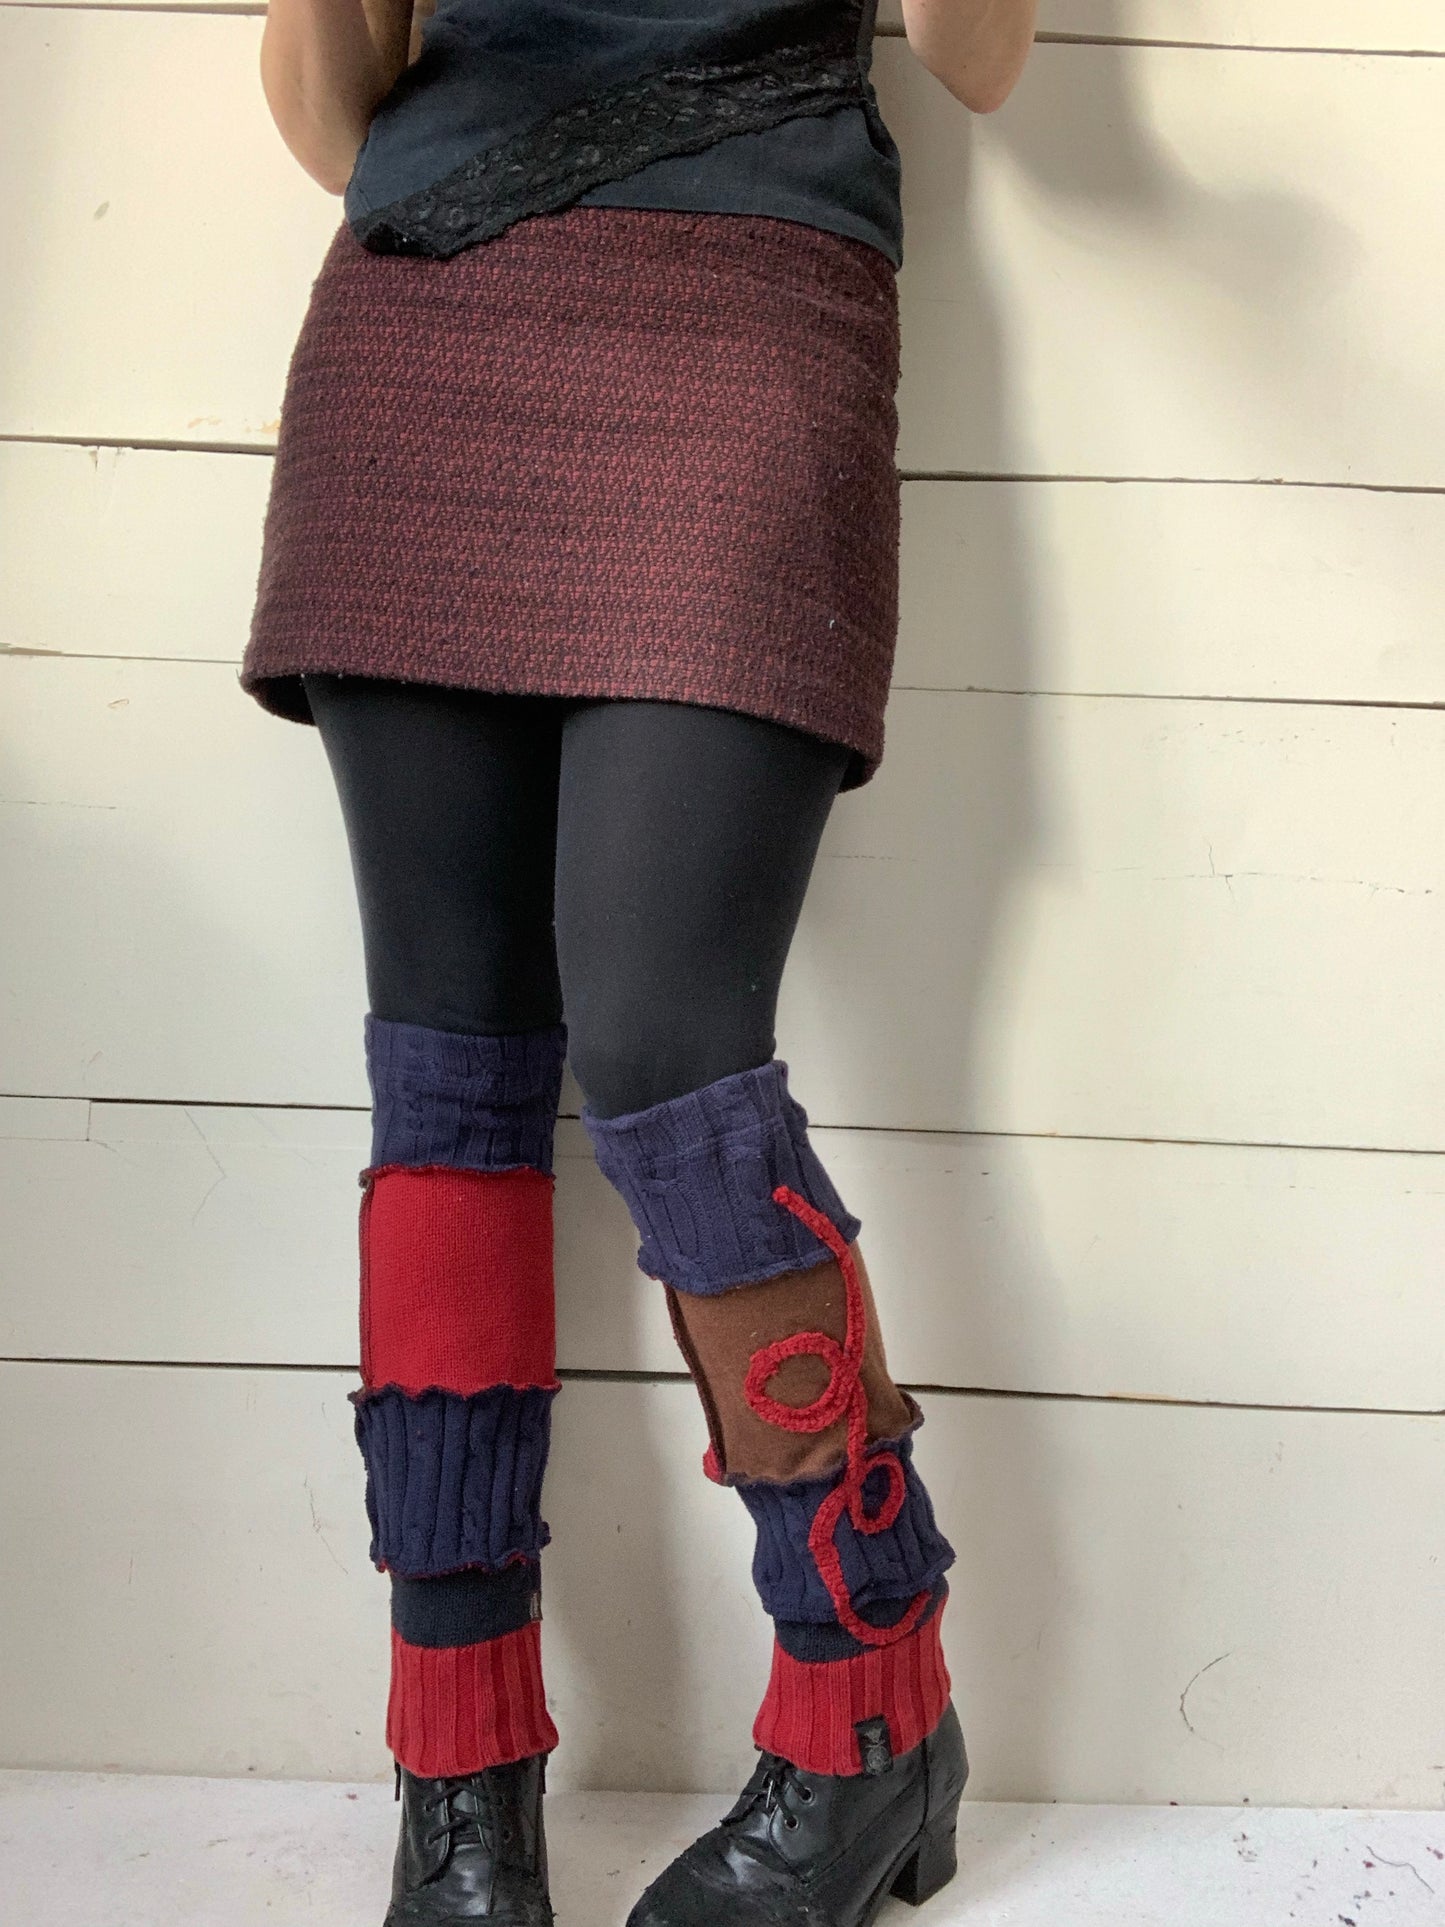 Blue, red and brown short leg warmers